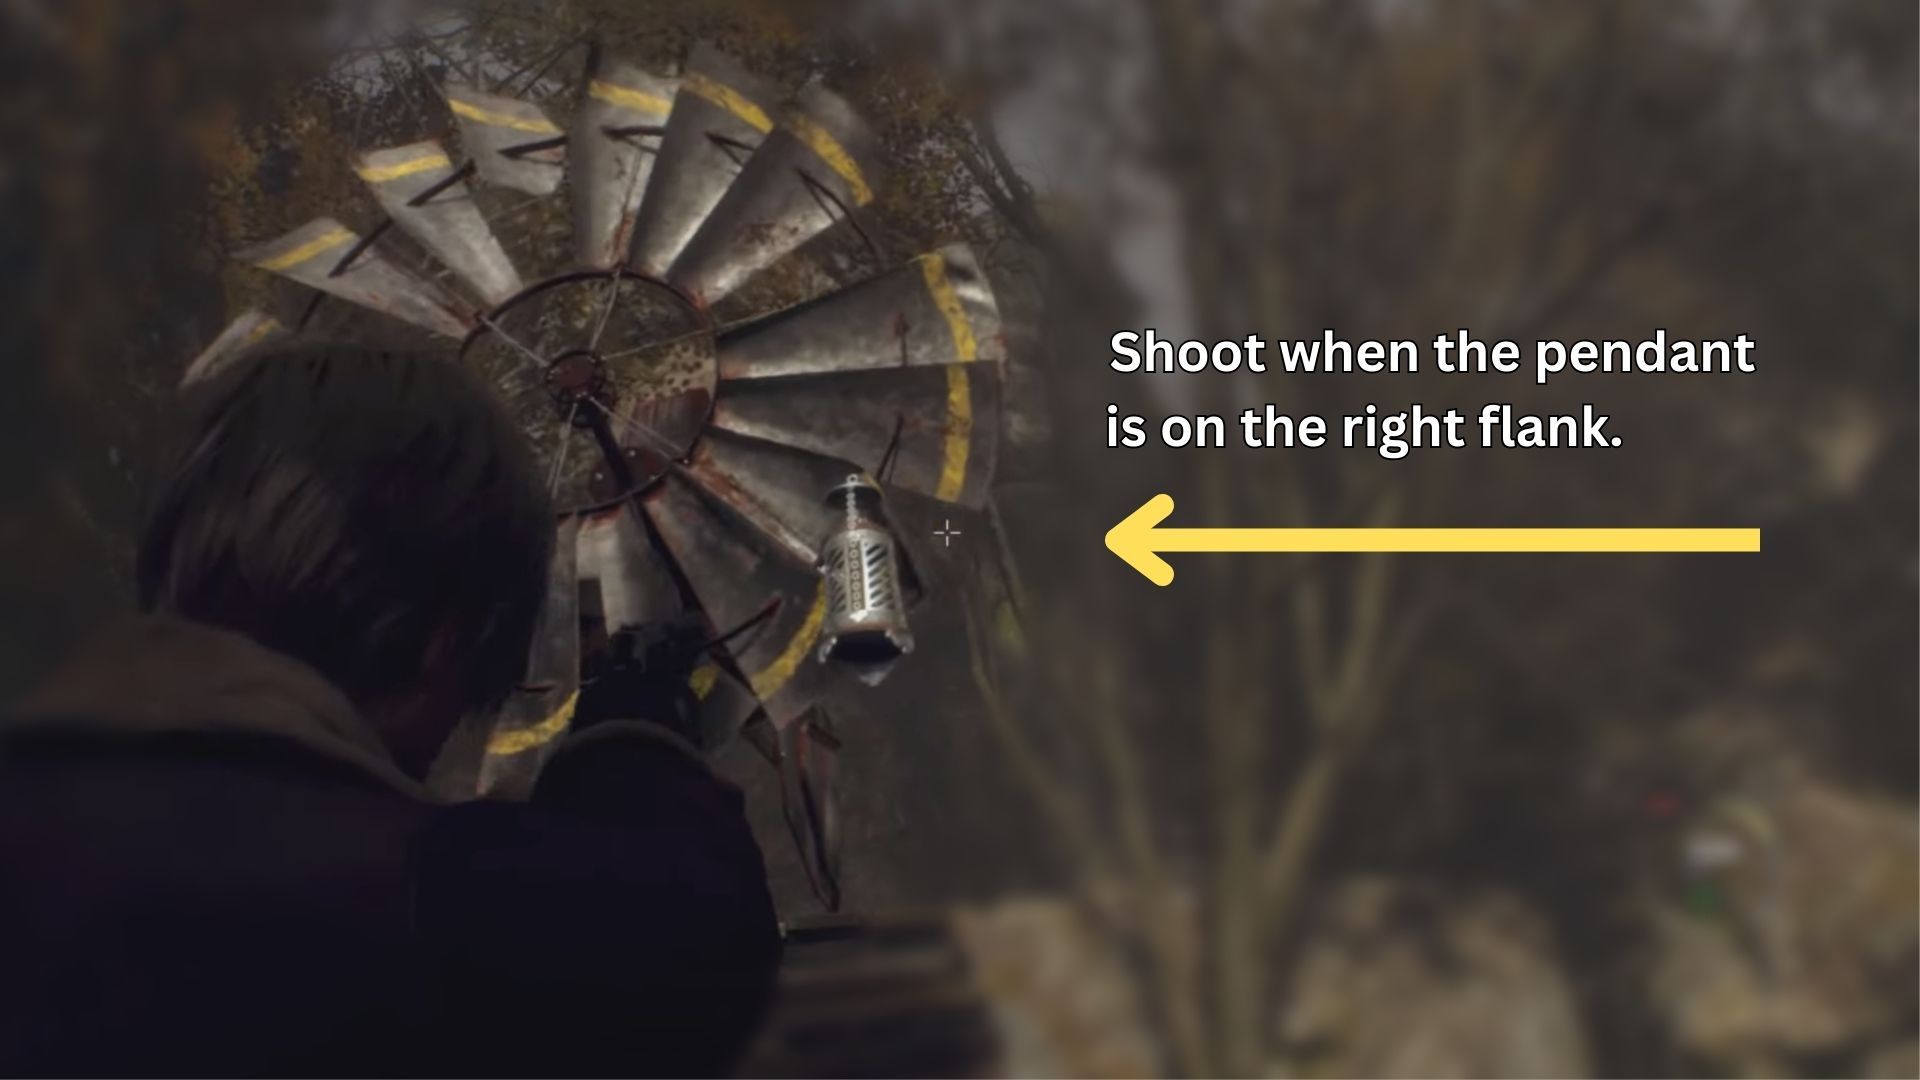 image showing how to keep the first pendant clean in the re4 remake.